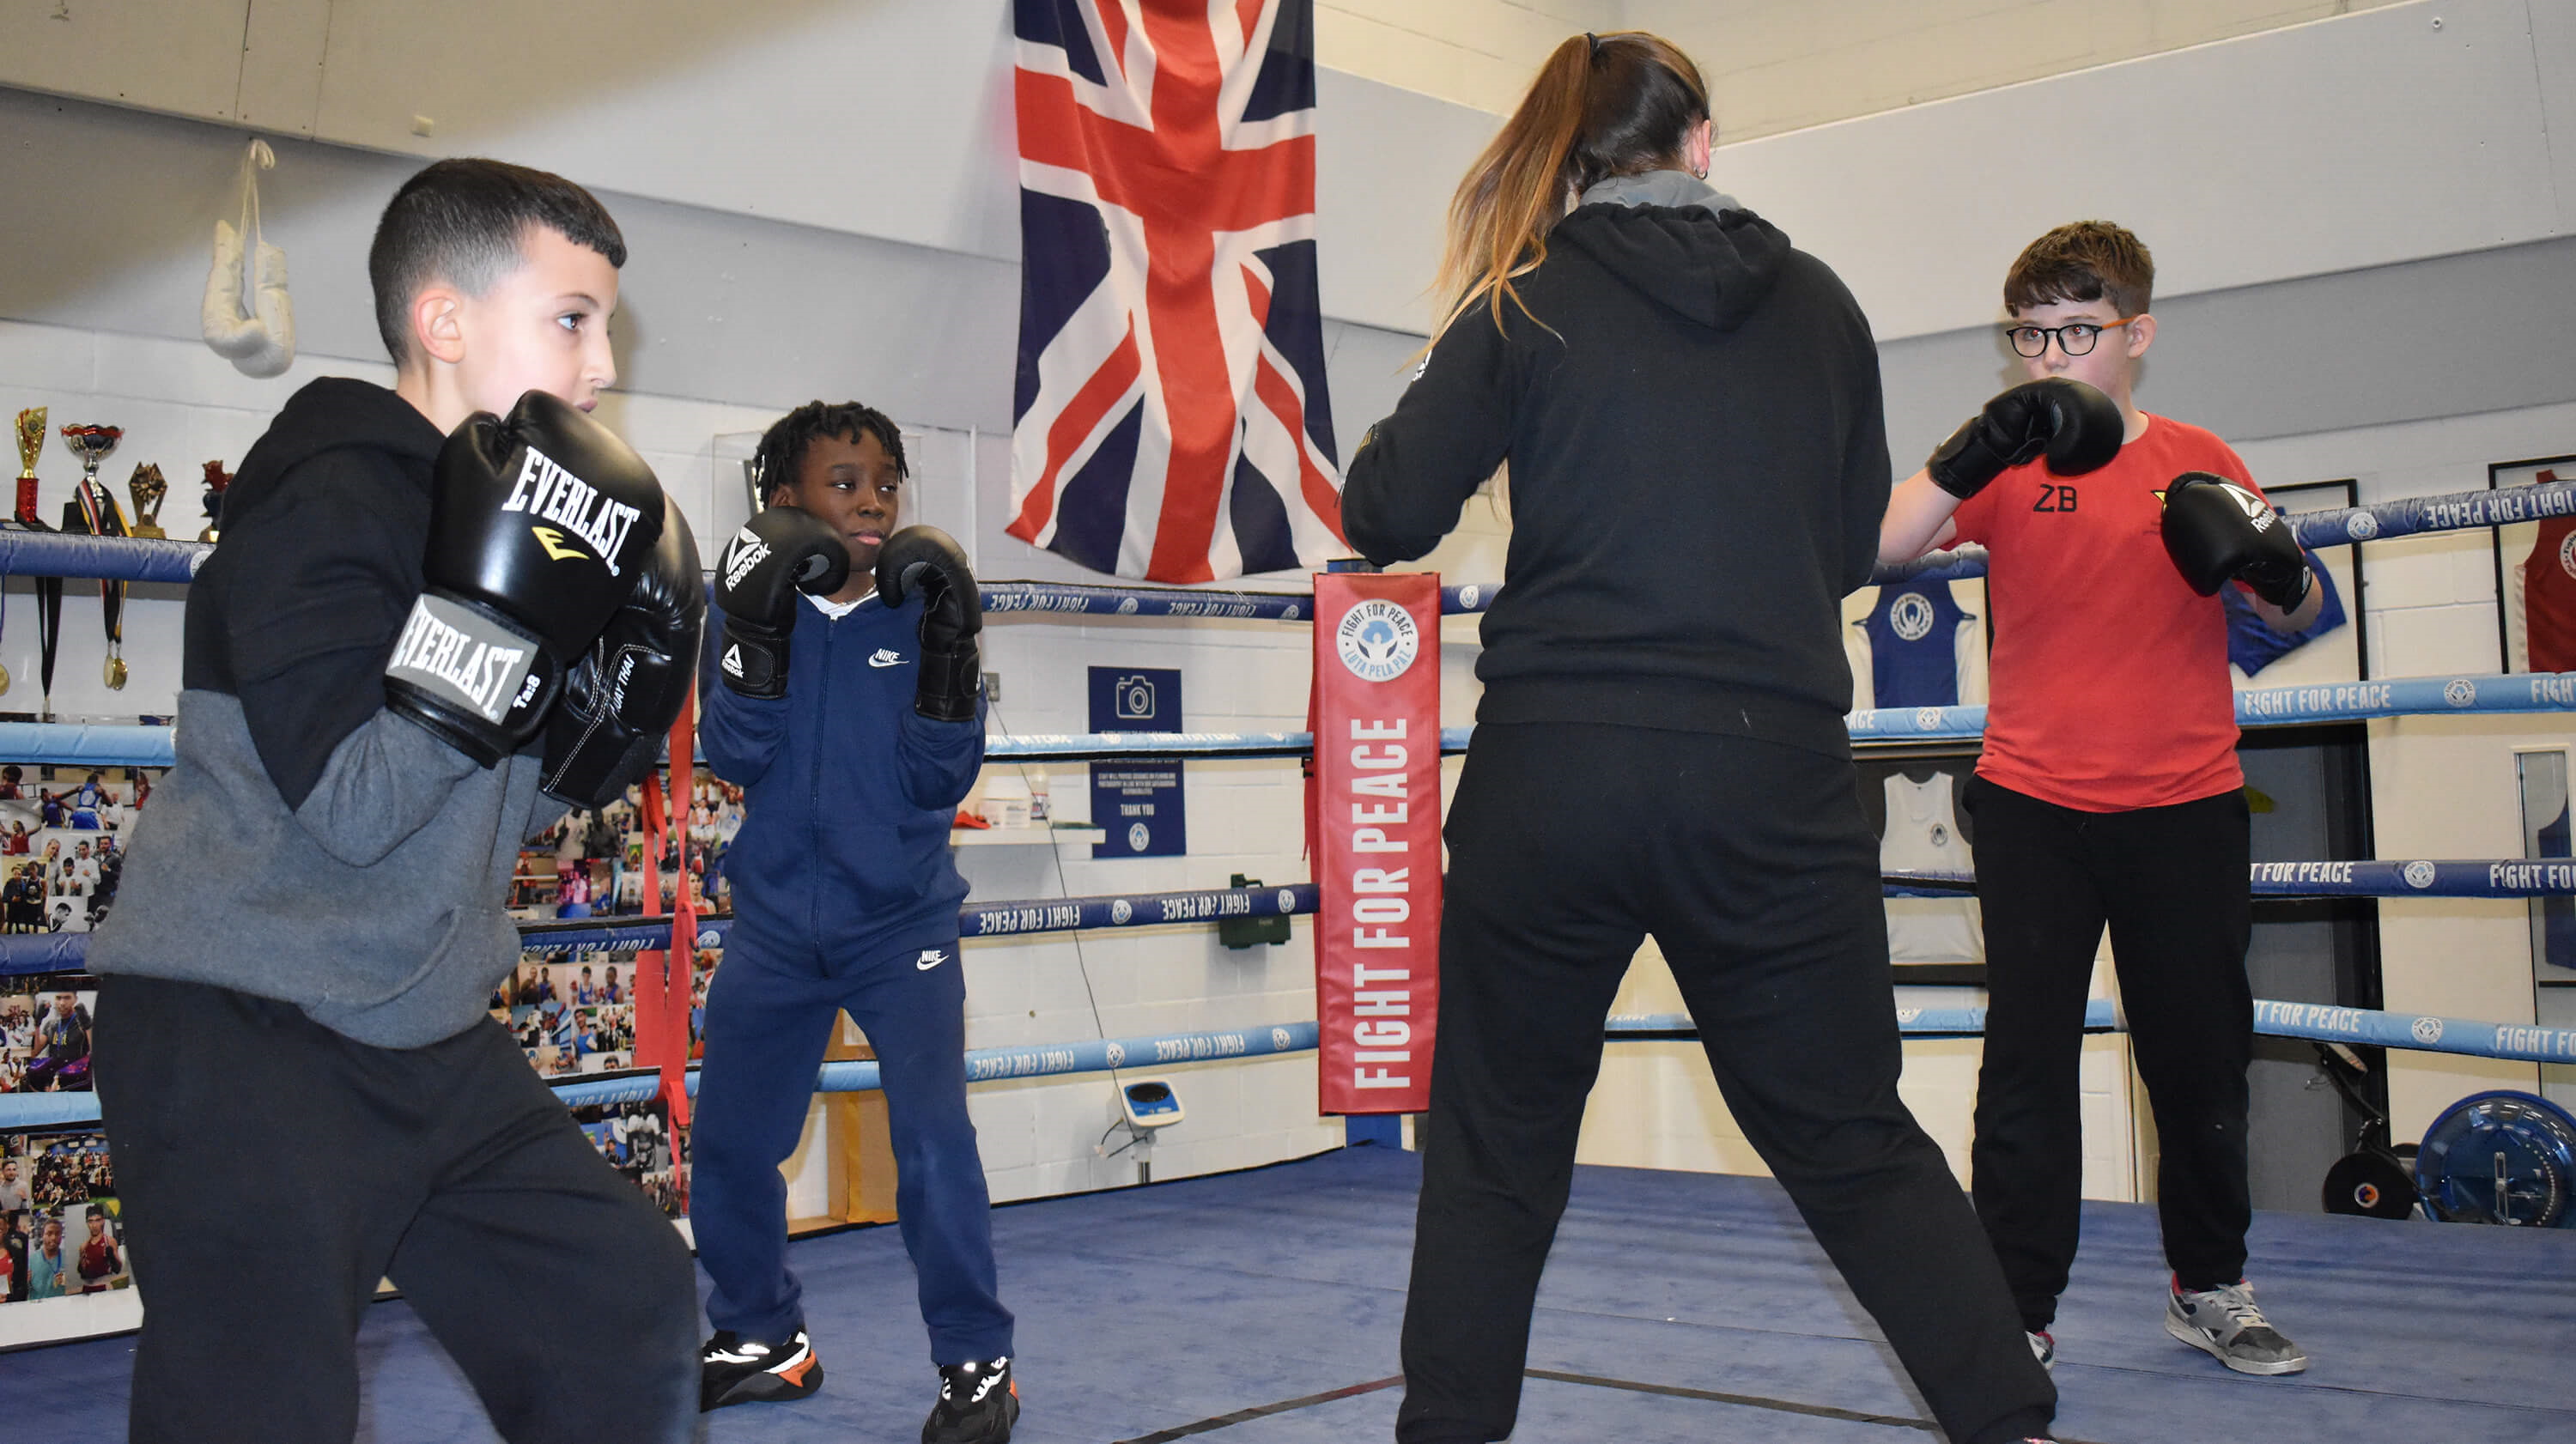 A coach stands in the ring surrounded by three young boxers who are practising their stance and footwork